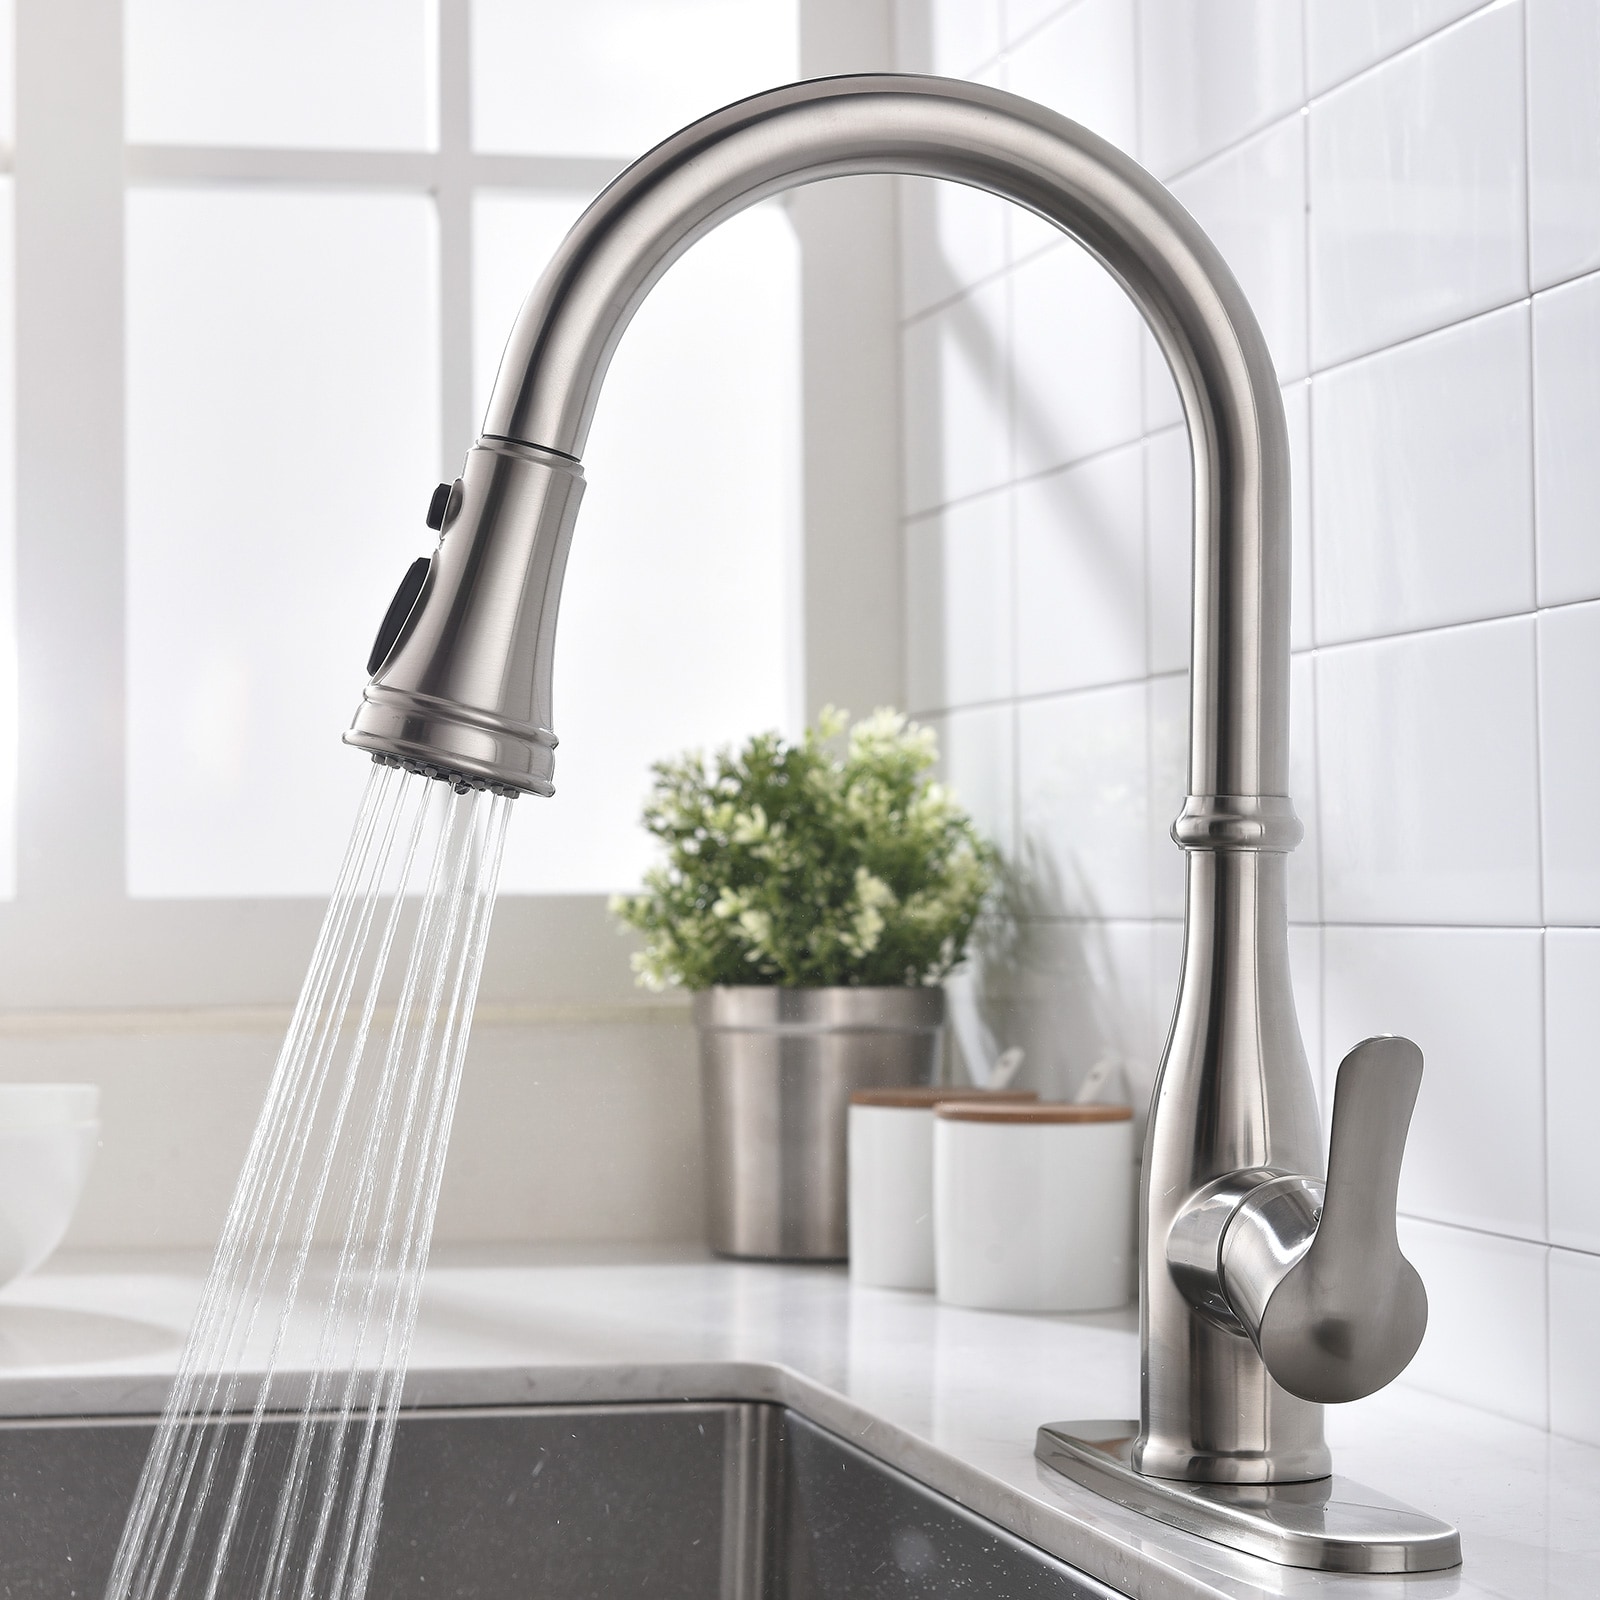 BWE A-94002 Single-Handle Kitchen Faucet Brushed Nickel Single Handle ...